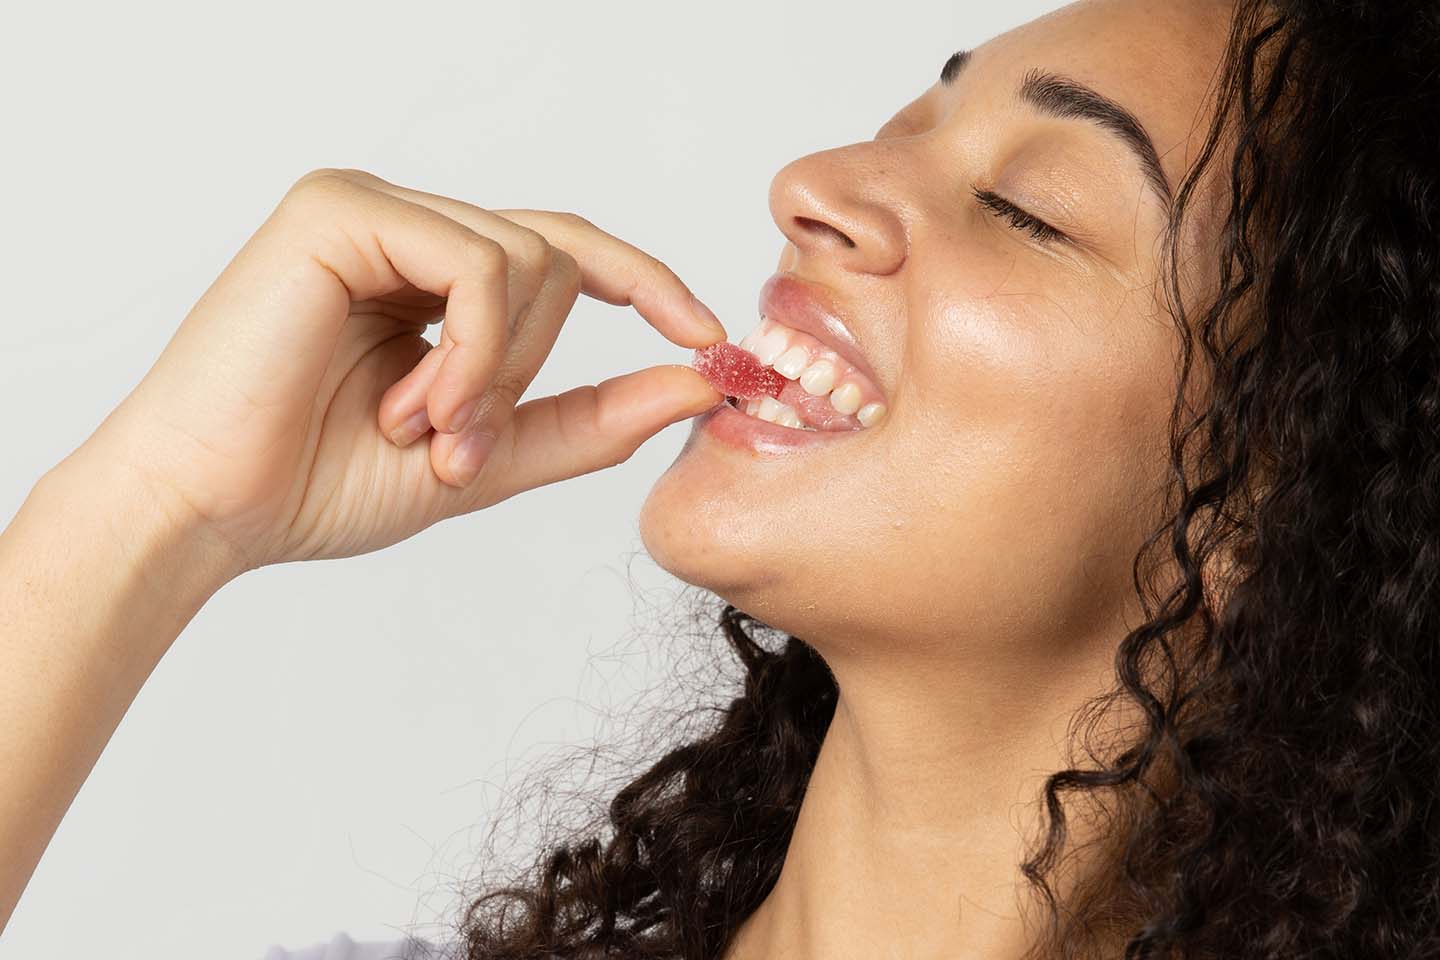 a woman smiling while biting a red-colored gummy